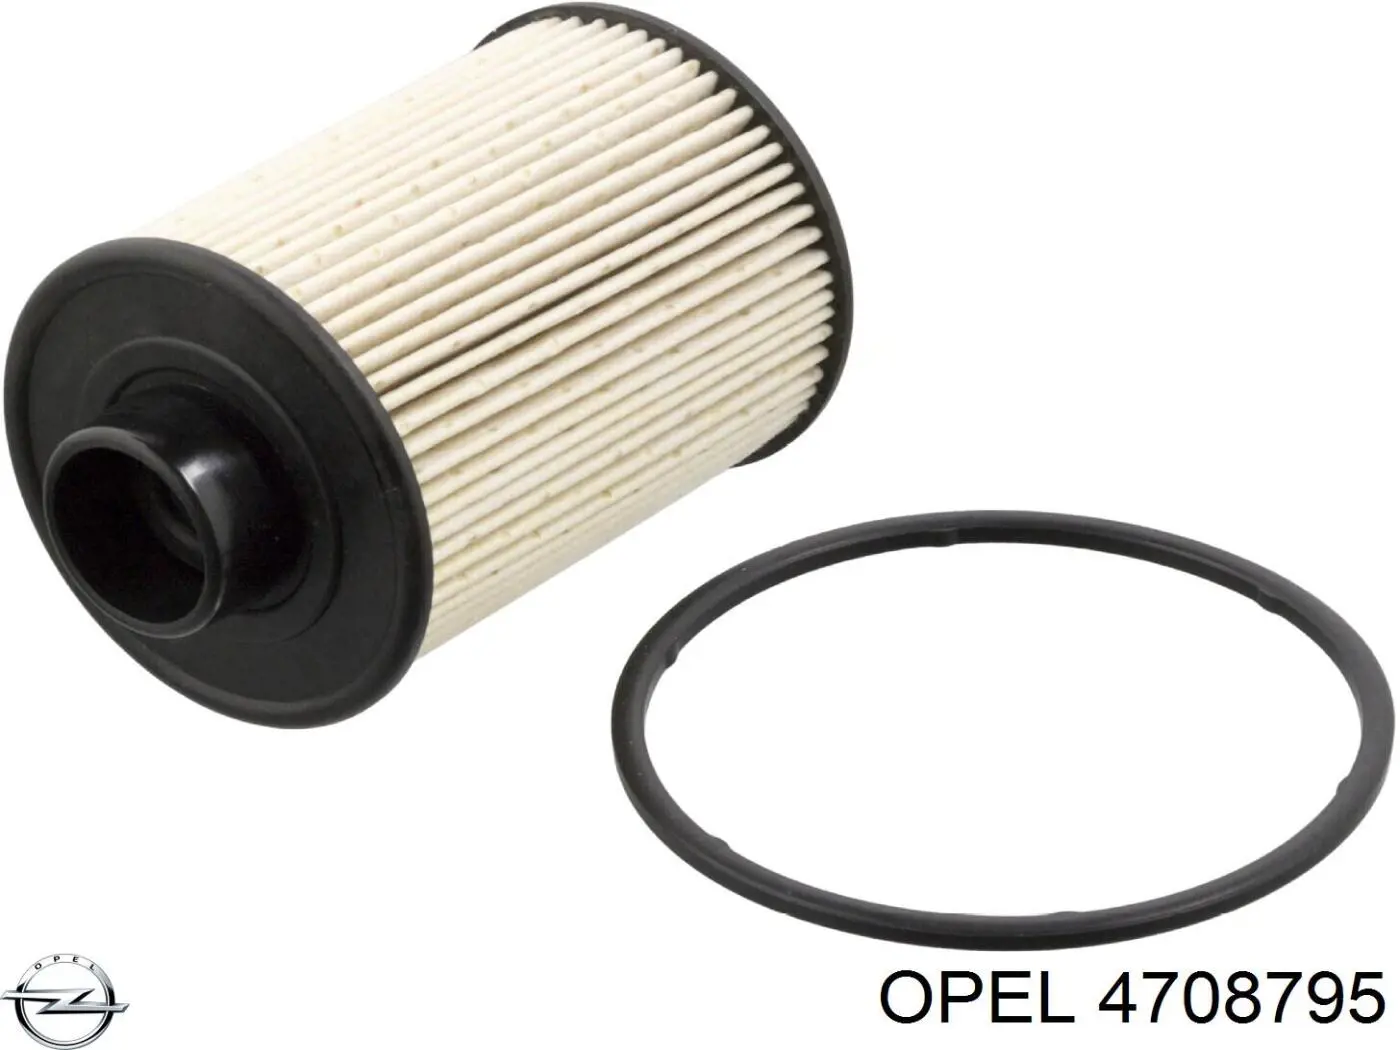 4708795 Opel filtro combustible